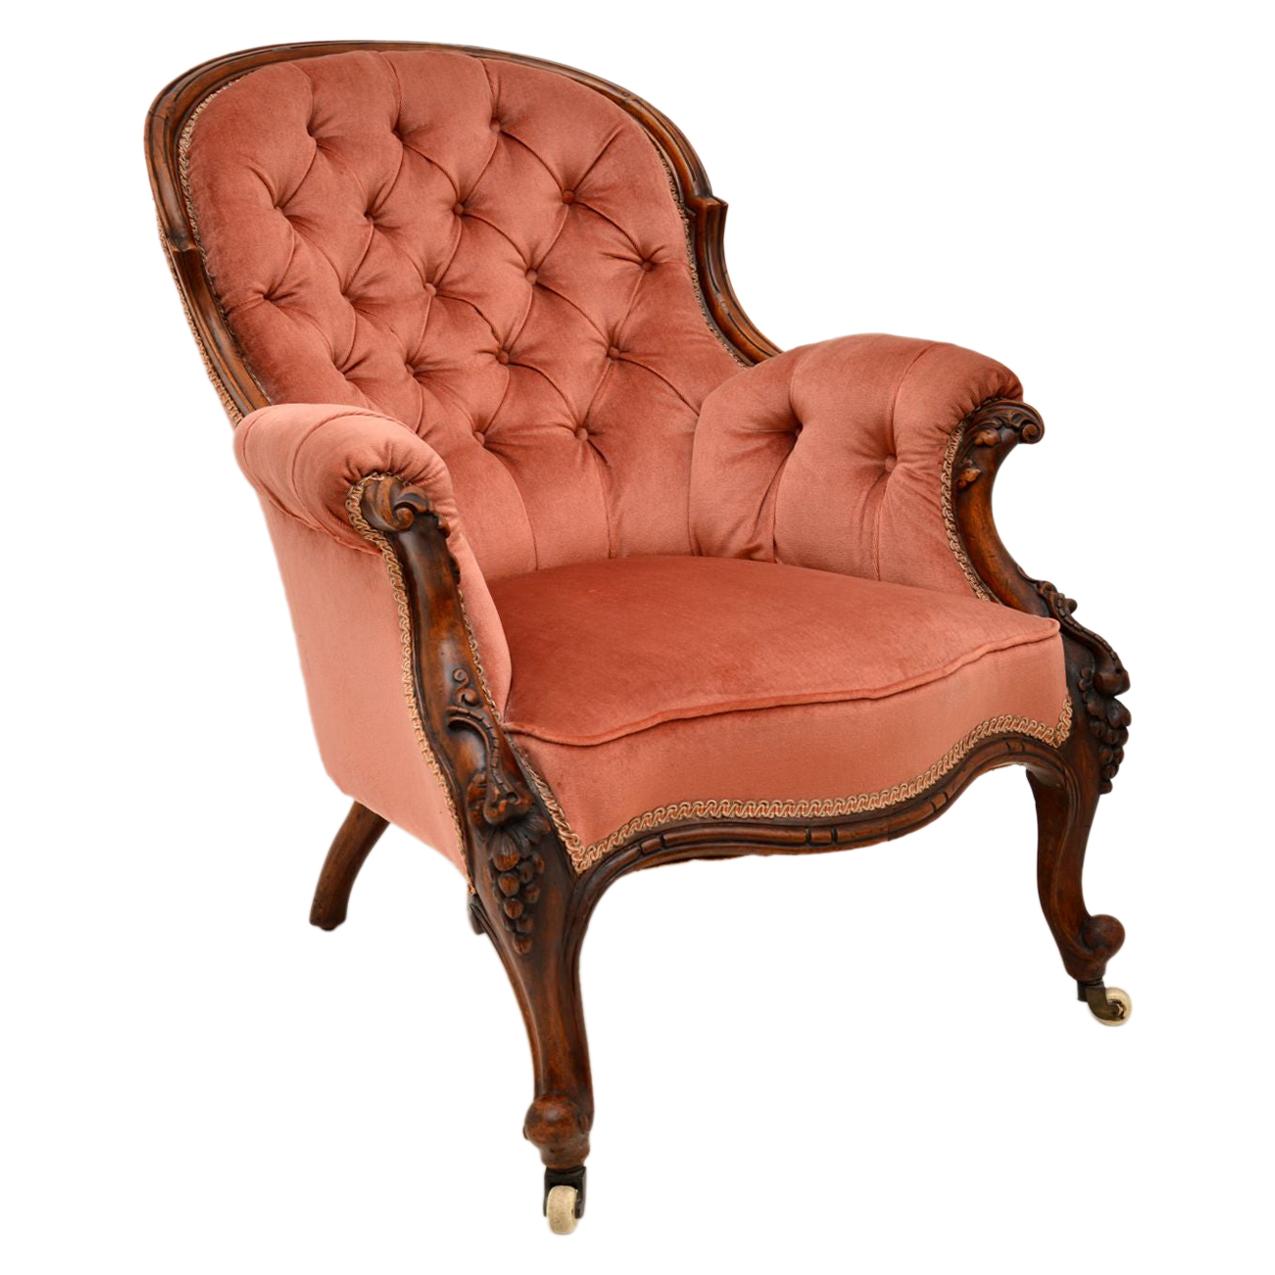 Antique Victorian Carved Mahogany Armchair